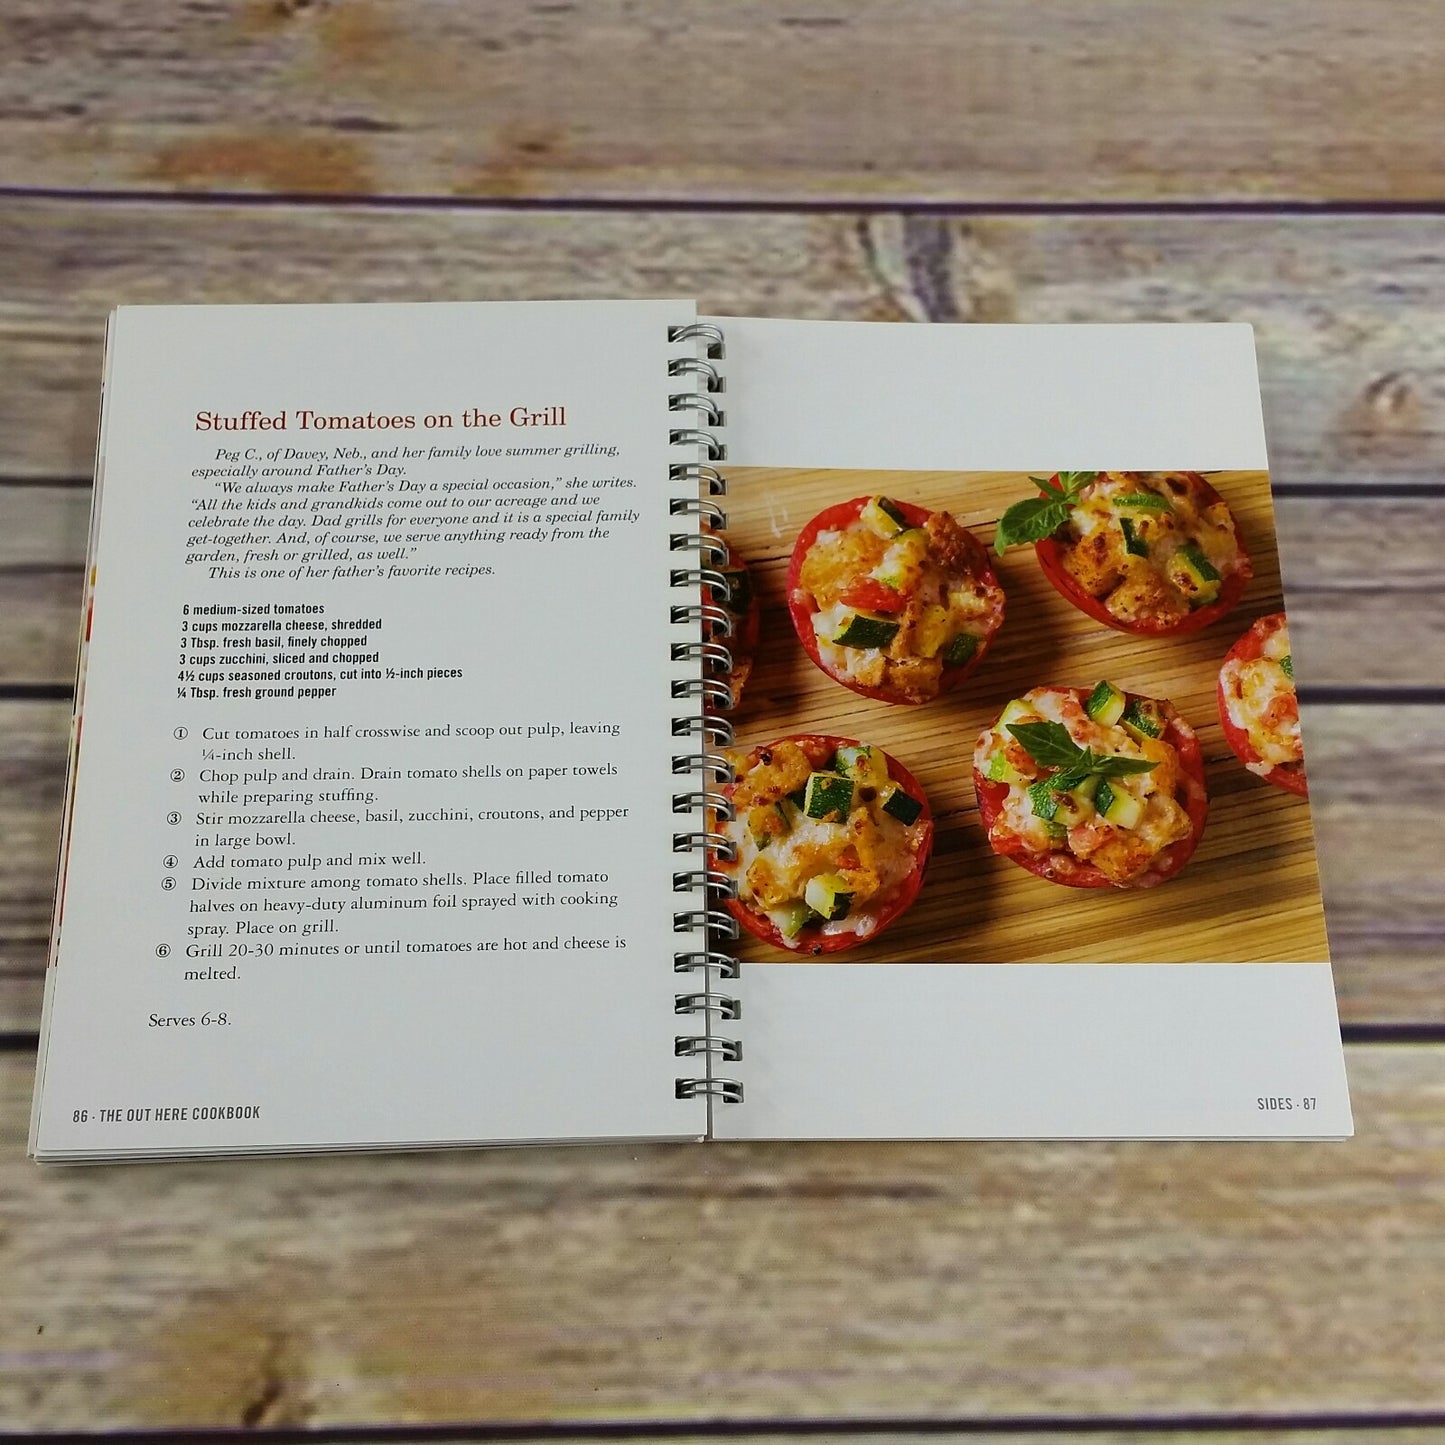 Out Here Cookbook by Tractor Supply Company Spiral Bound 2014 Recipes - At Grandma's Table